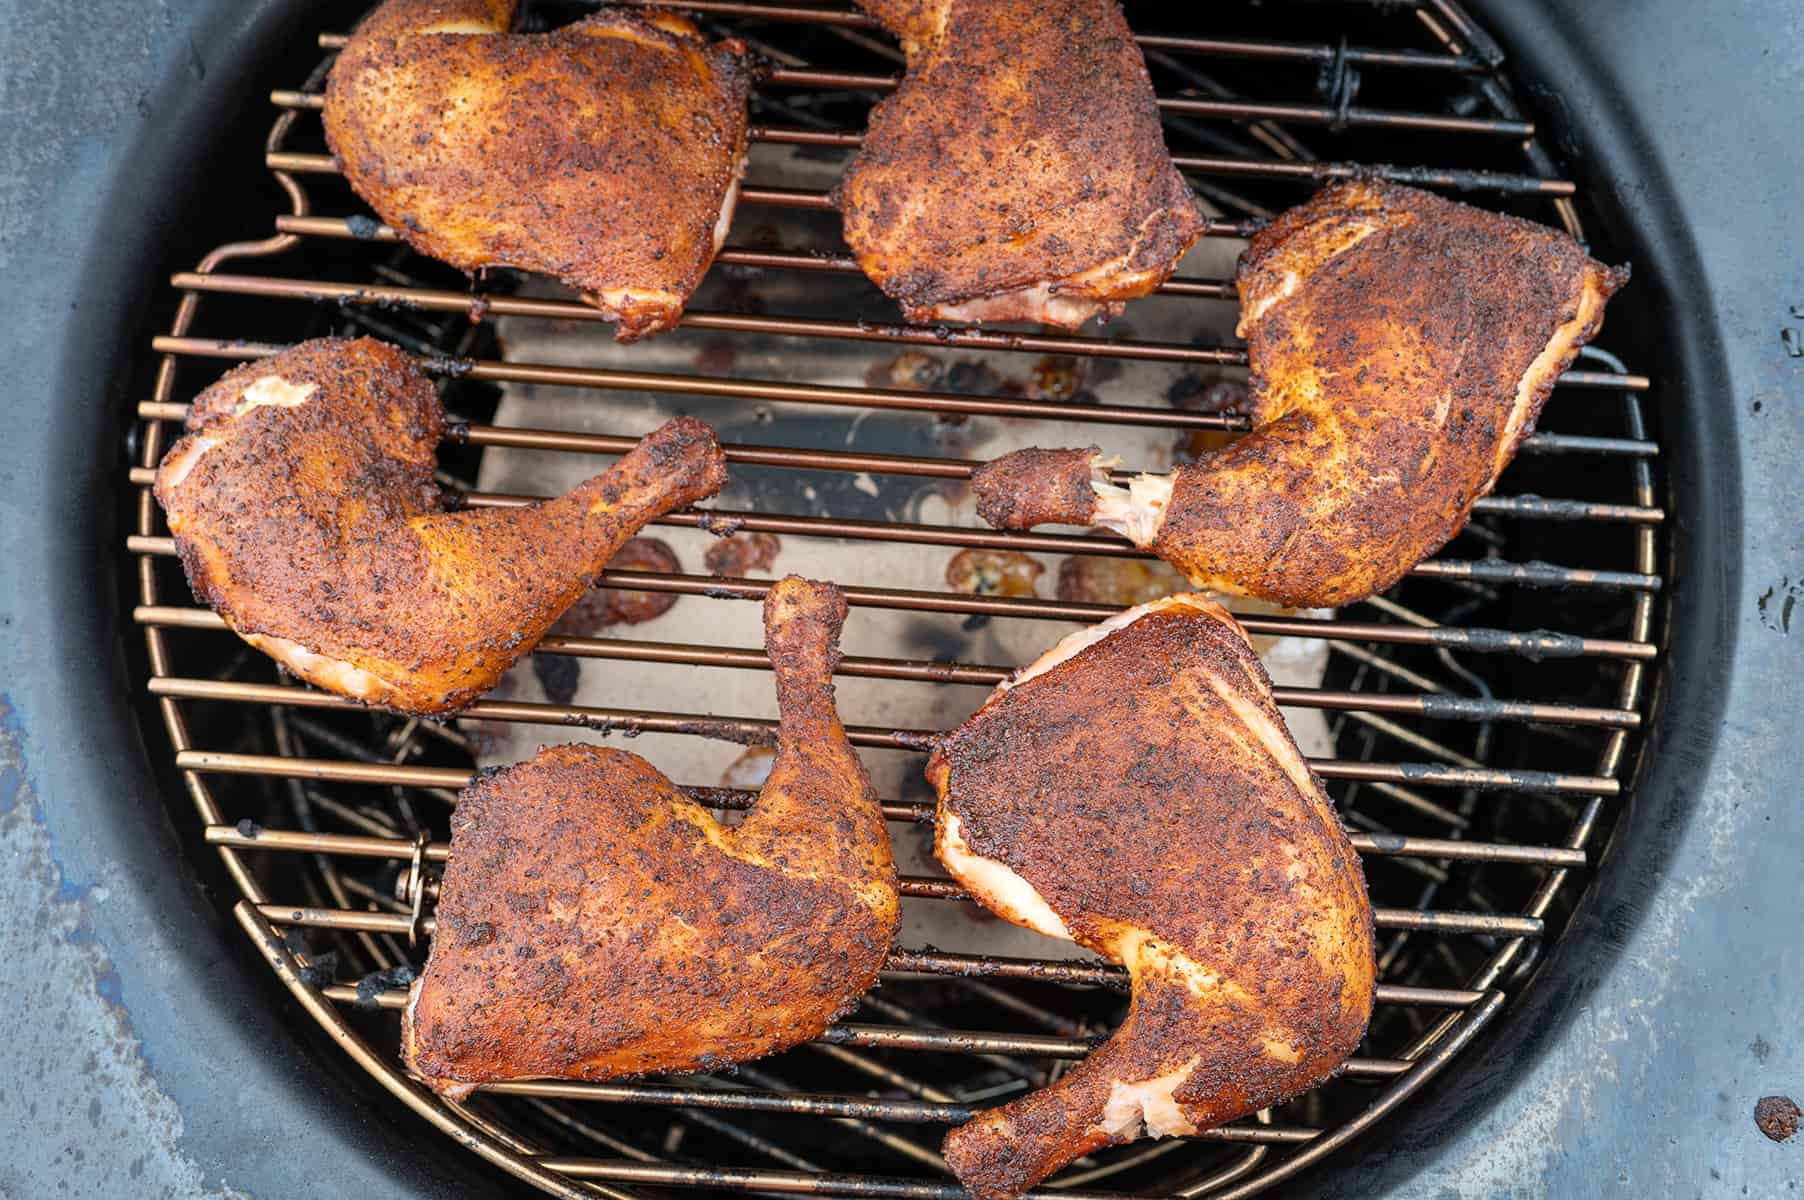 Smoked chicken quarters on grill.